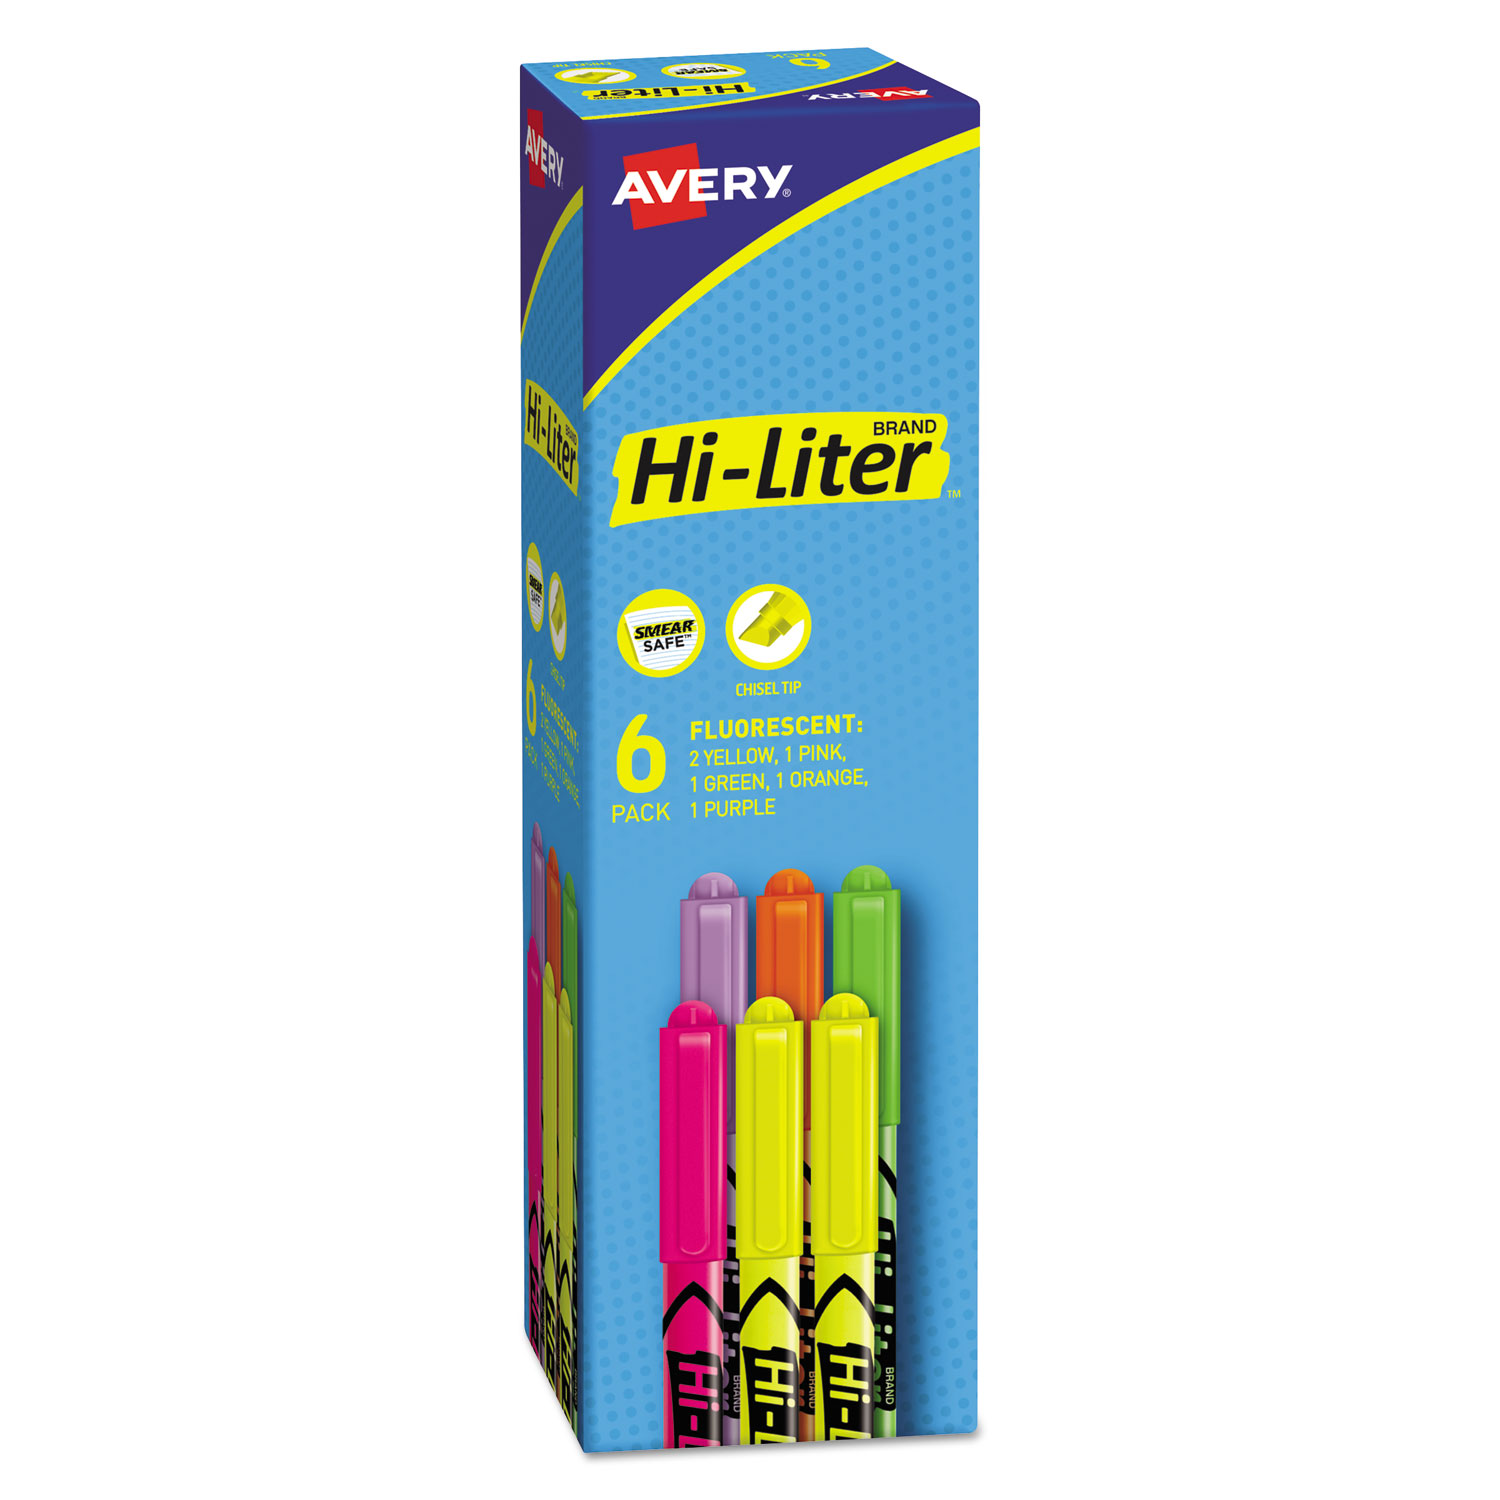  Avery 23565 HI-LITER Pen-Style Highlighters, Chisel Tip, Assorted Colors, 6/Set (AVE23565) 